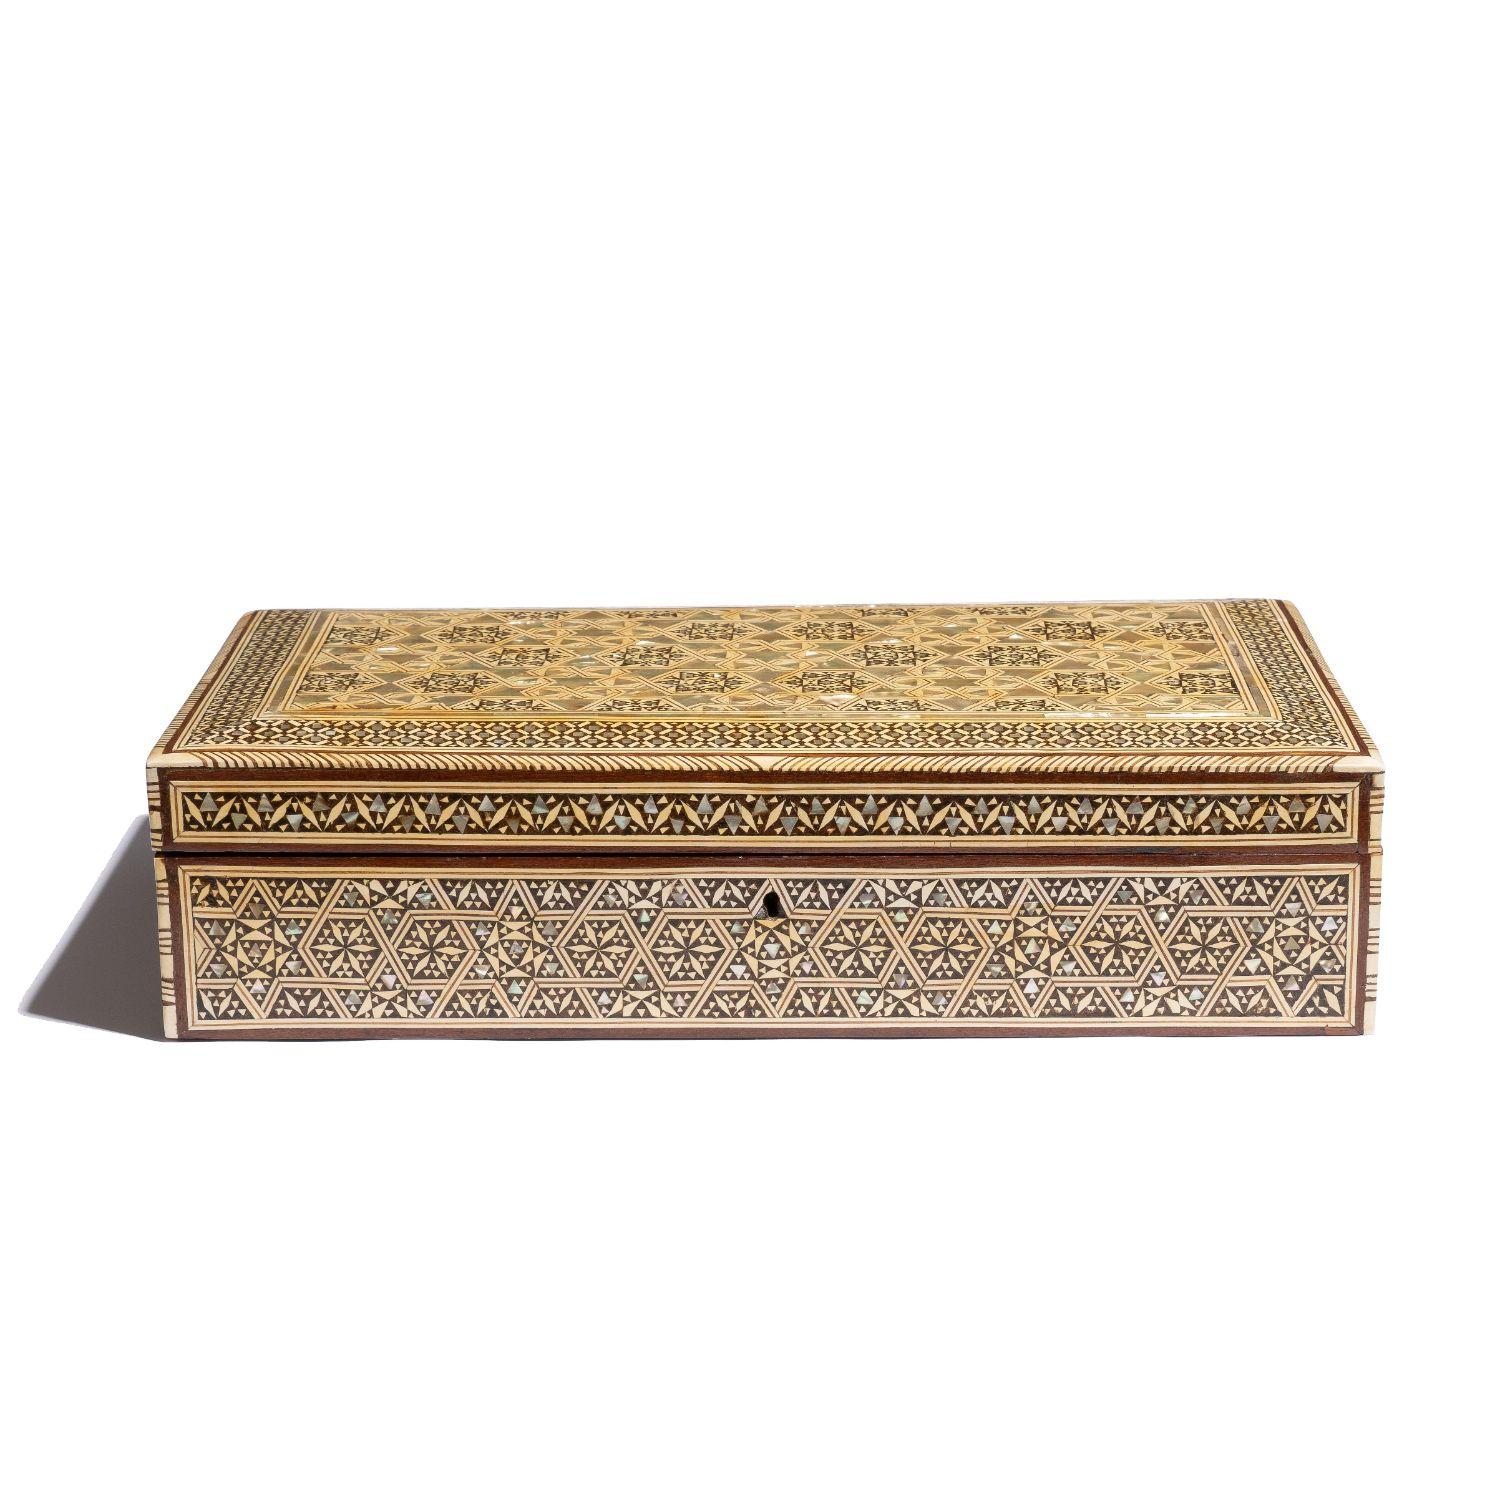 Damascus inlaid rectangular box with hinged lid and covered with matched geometric hexagonal pattern with diapered border. The inlays are composed of sandalwood and ebony with abalone and camel bone on mahogany with a piano hinge. The box is fitted